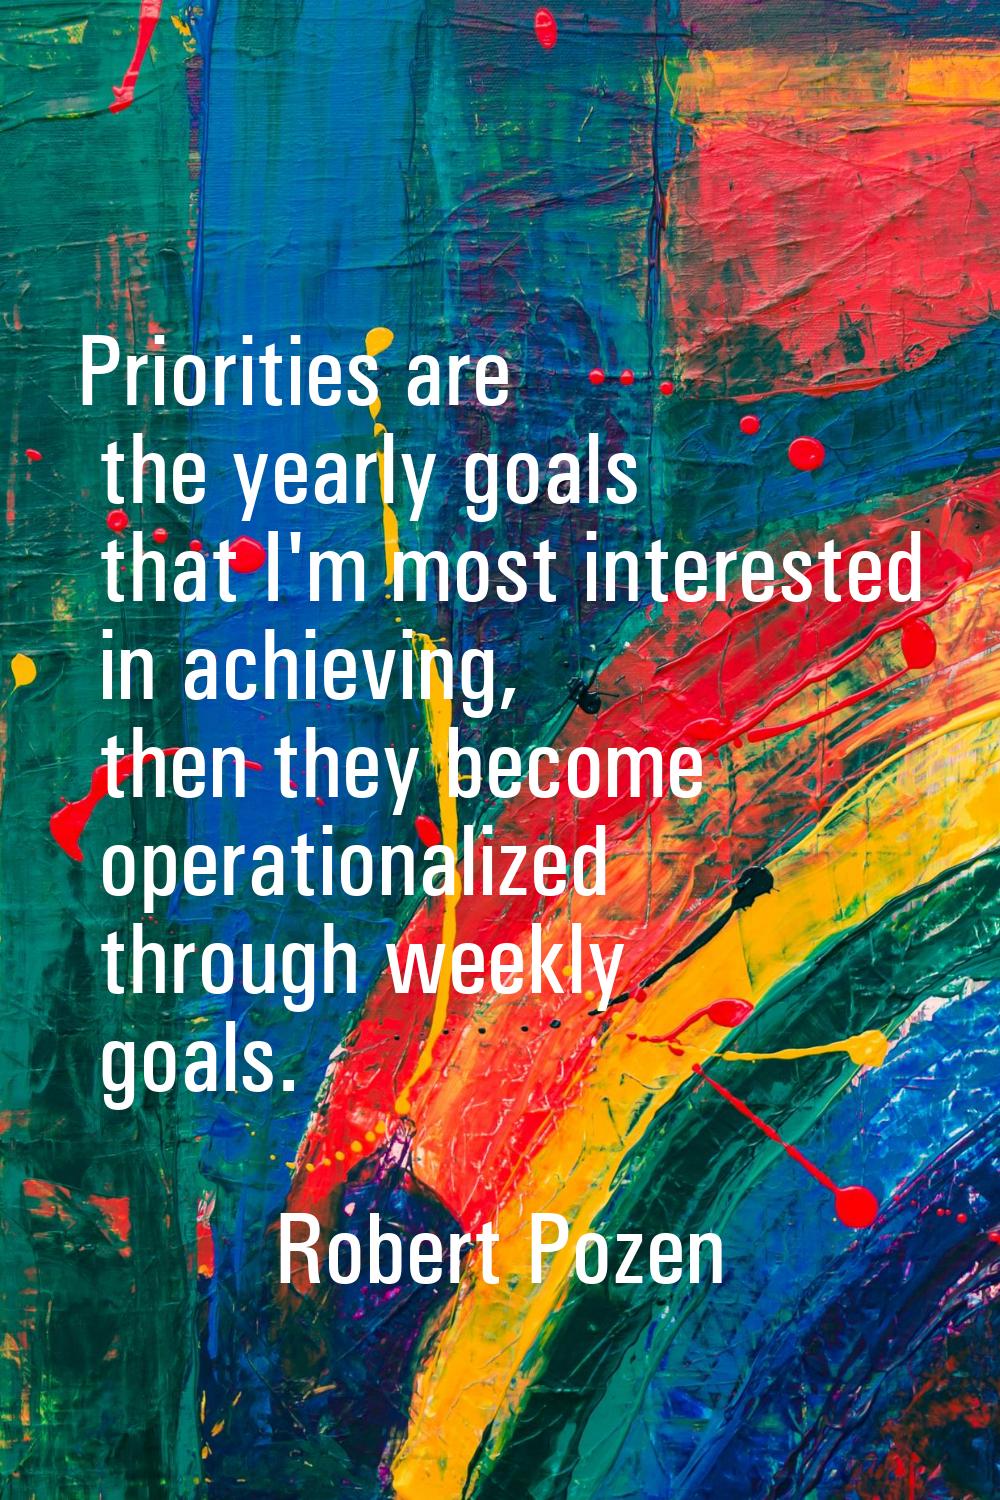 Priorities are the yearly goals that I'm most interested in achieving, then they become operational